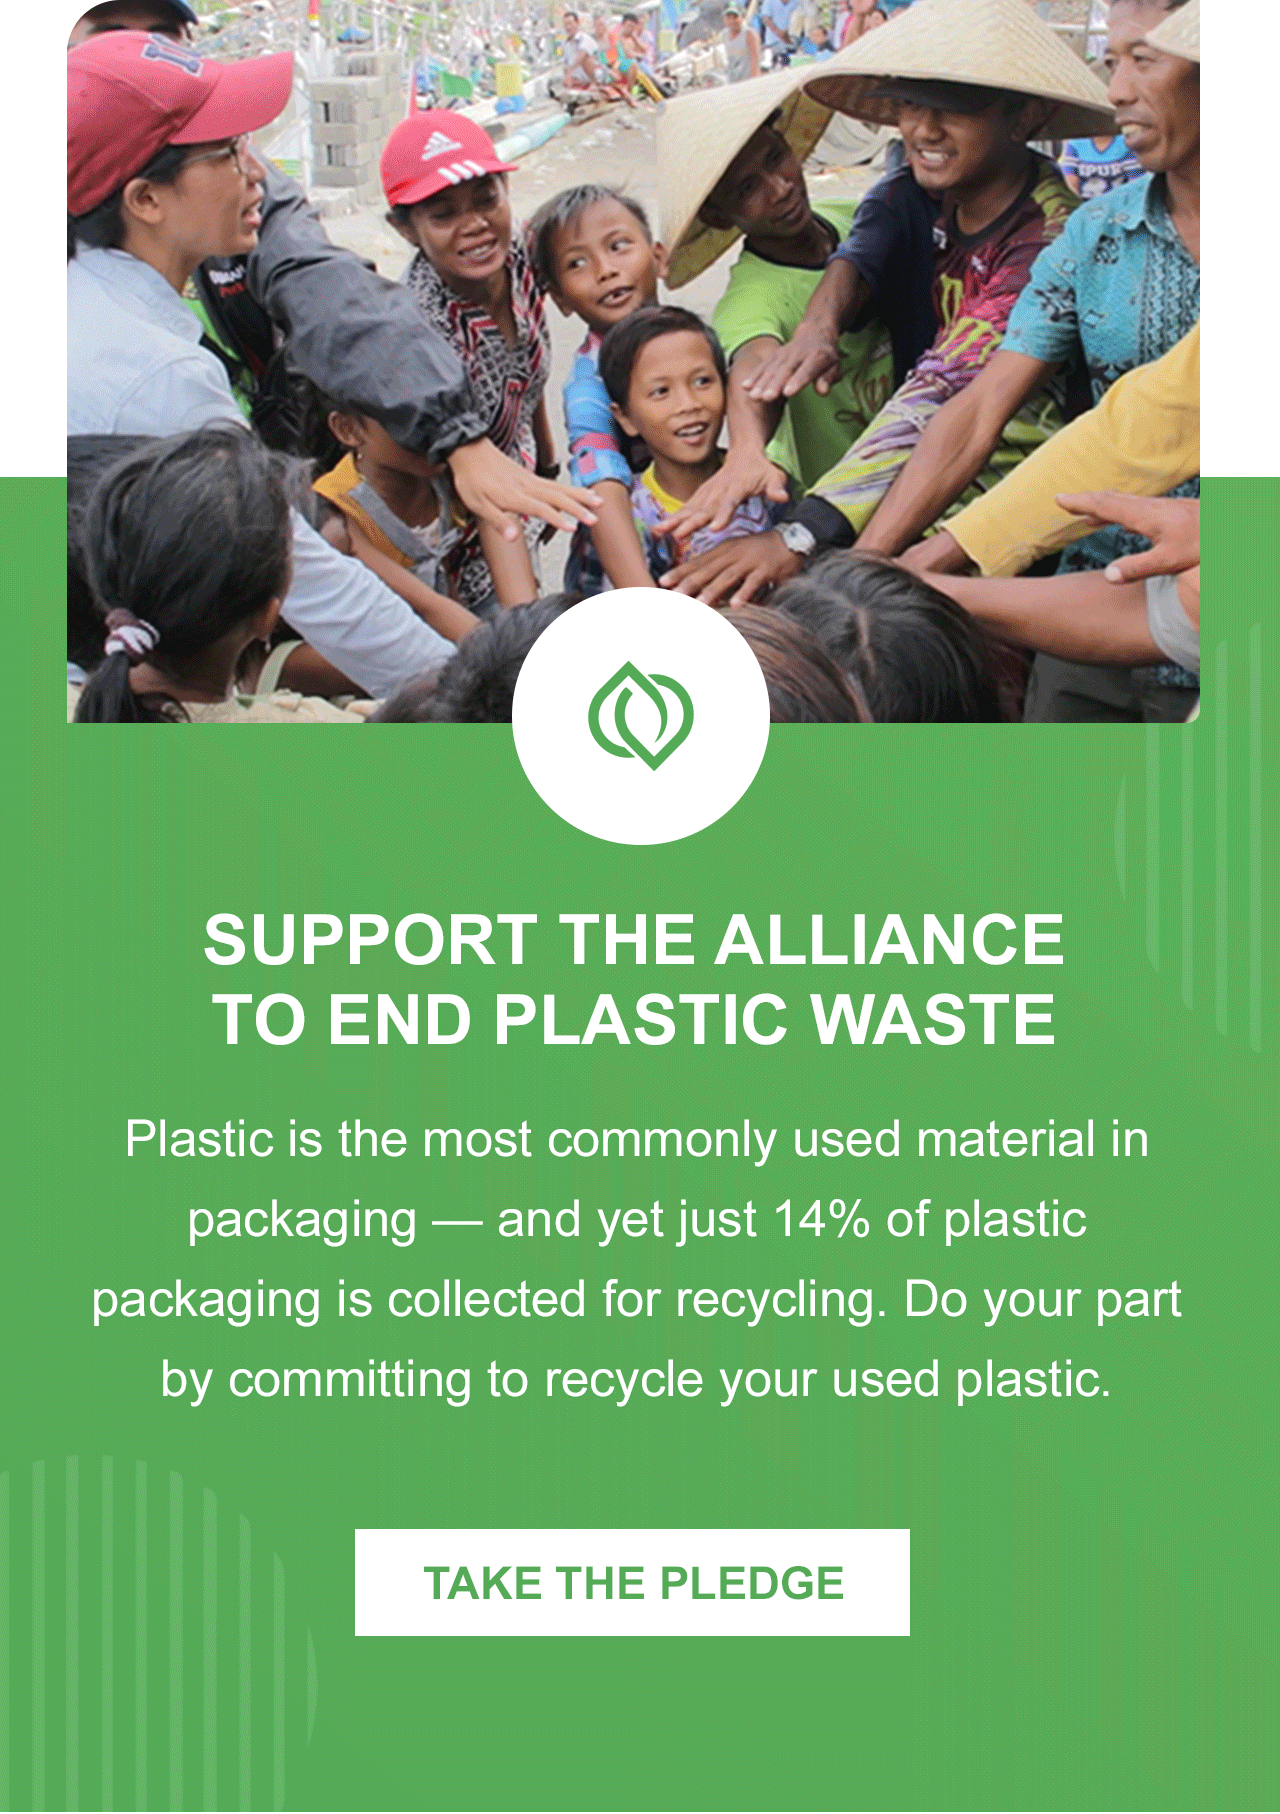 Support the Alliance to End Plastic Waste. Plastic is the most commonly used material in packaging - and yet just 14% of plastic packaging is collected for recycling. Do your part by committing to recycle your used plastic.